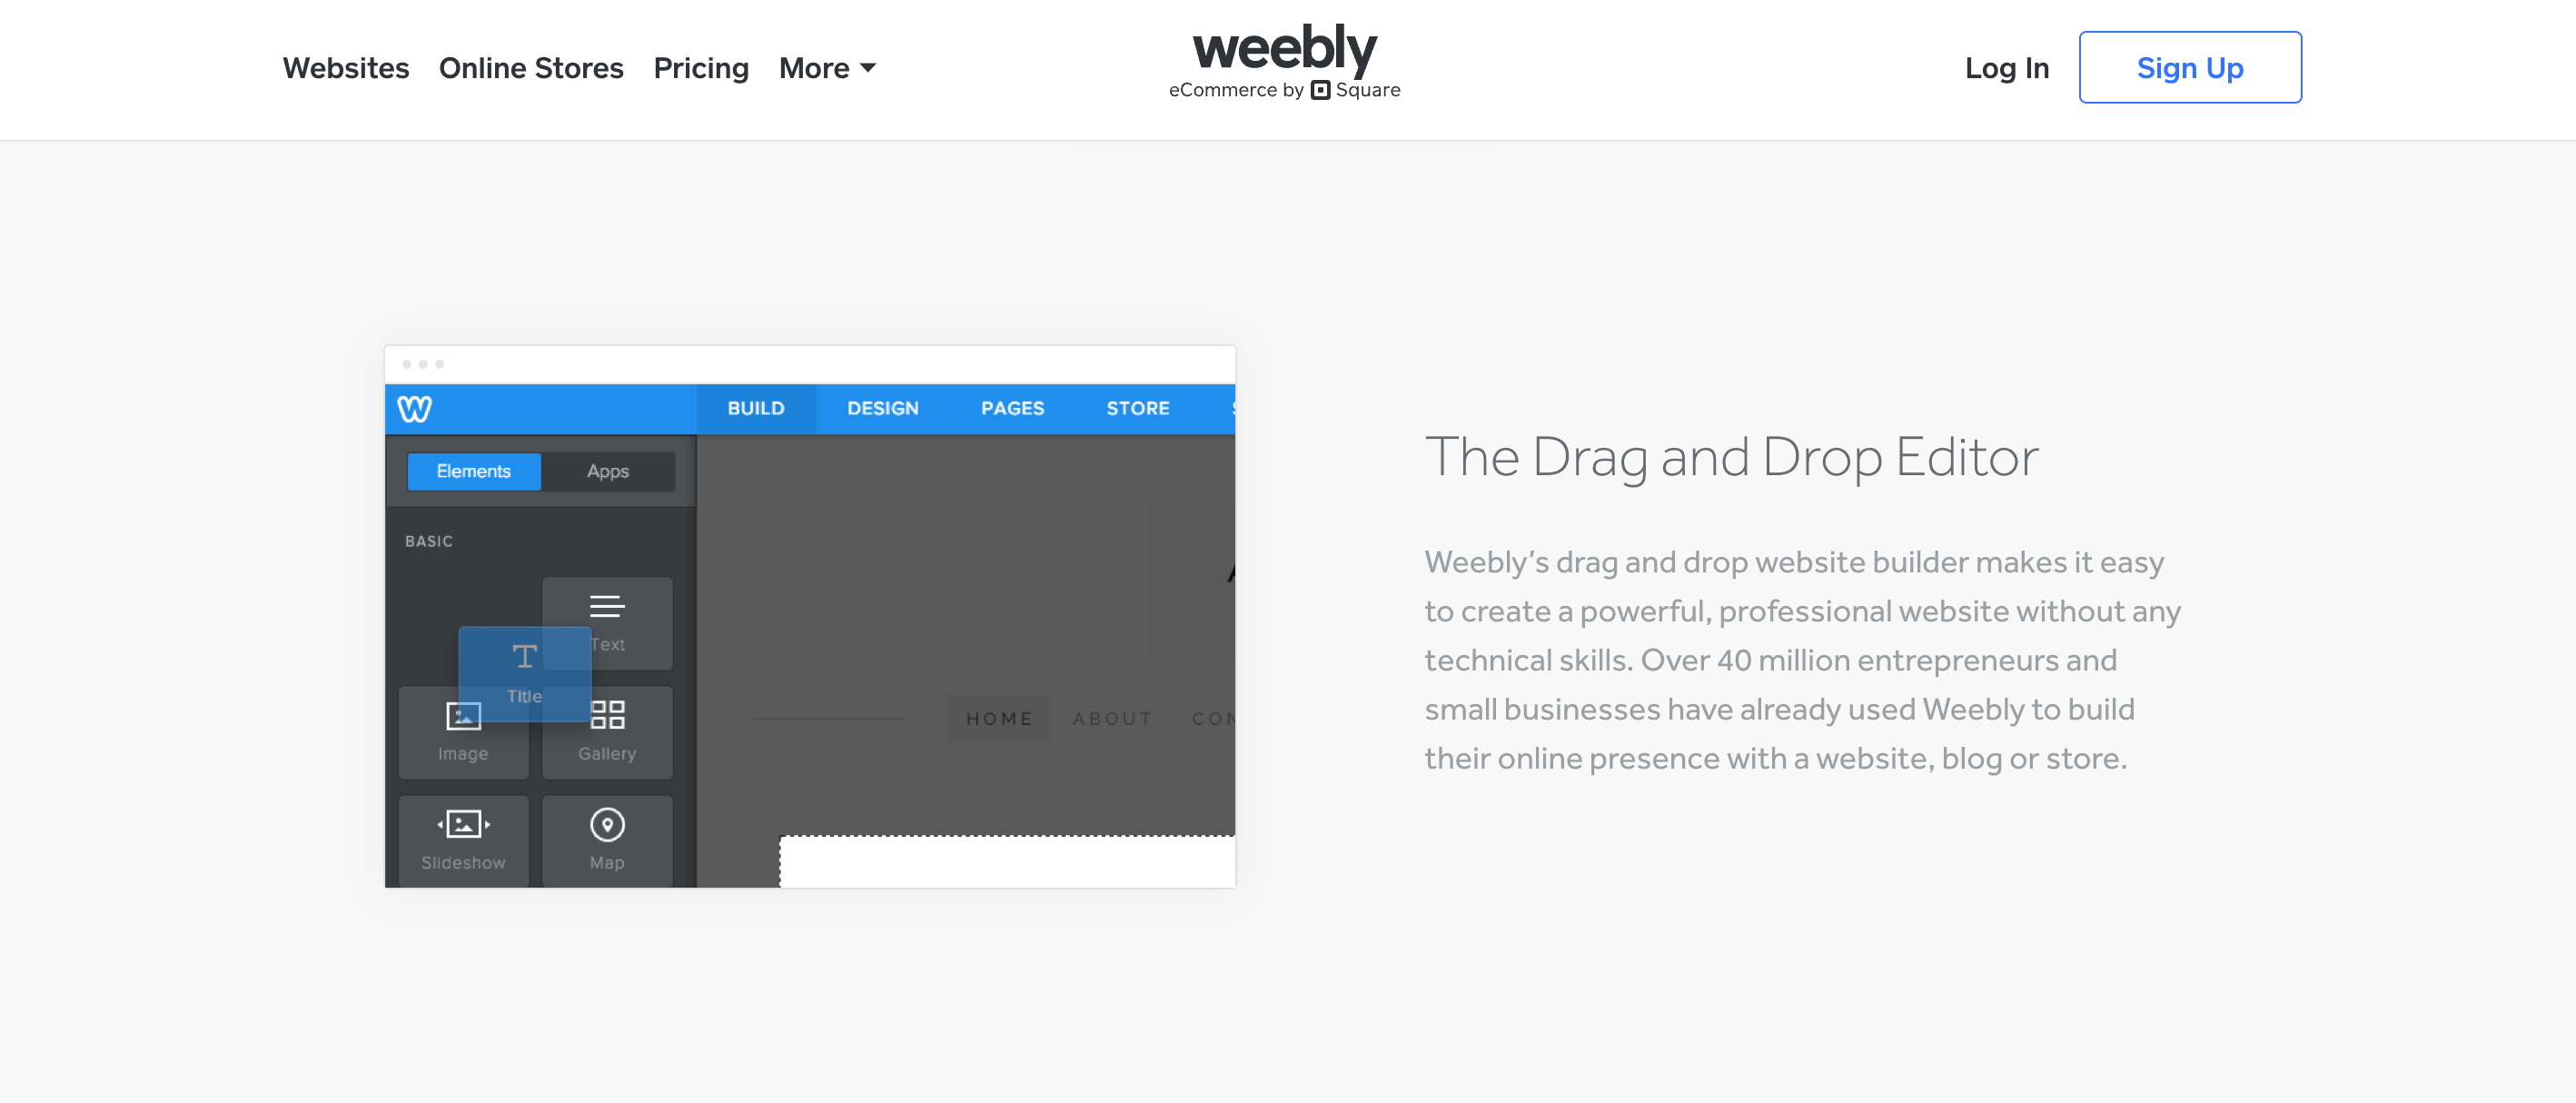 Site owners can create their Weebly website with a drag and drop editor.